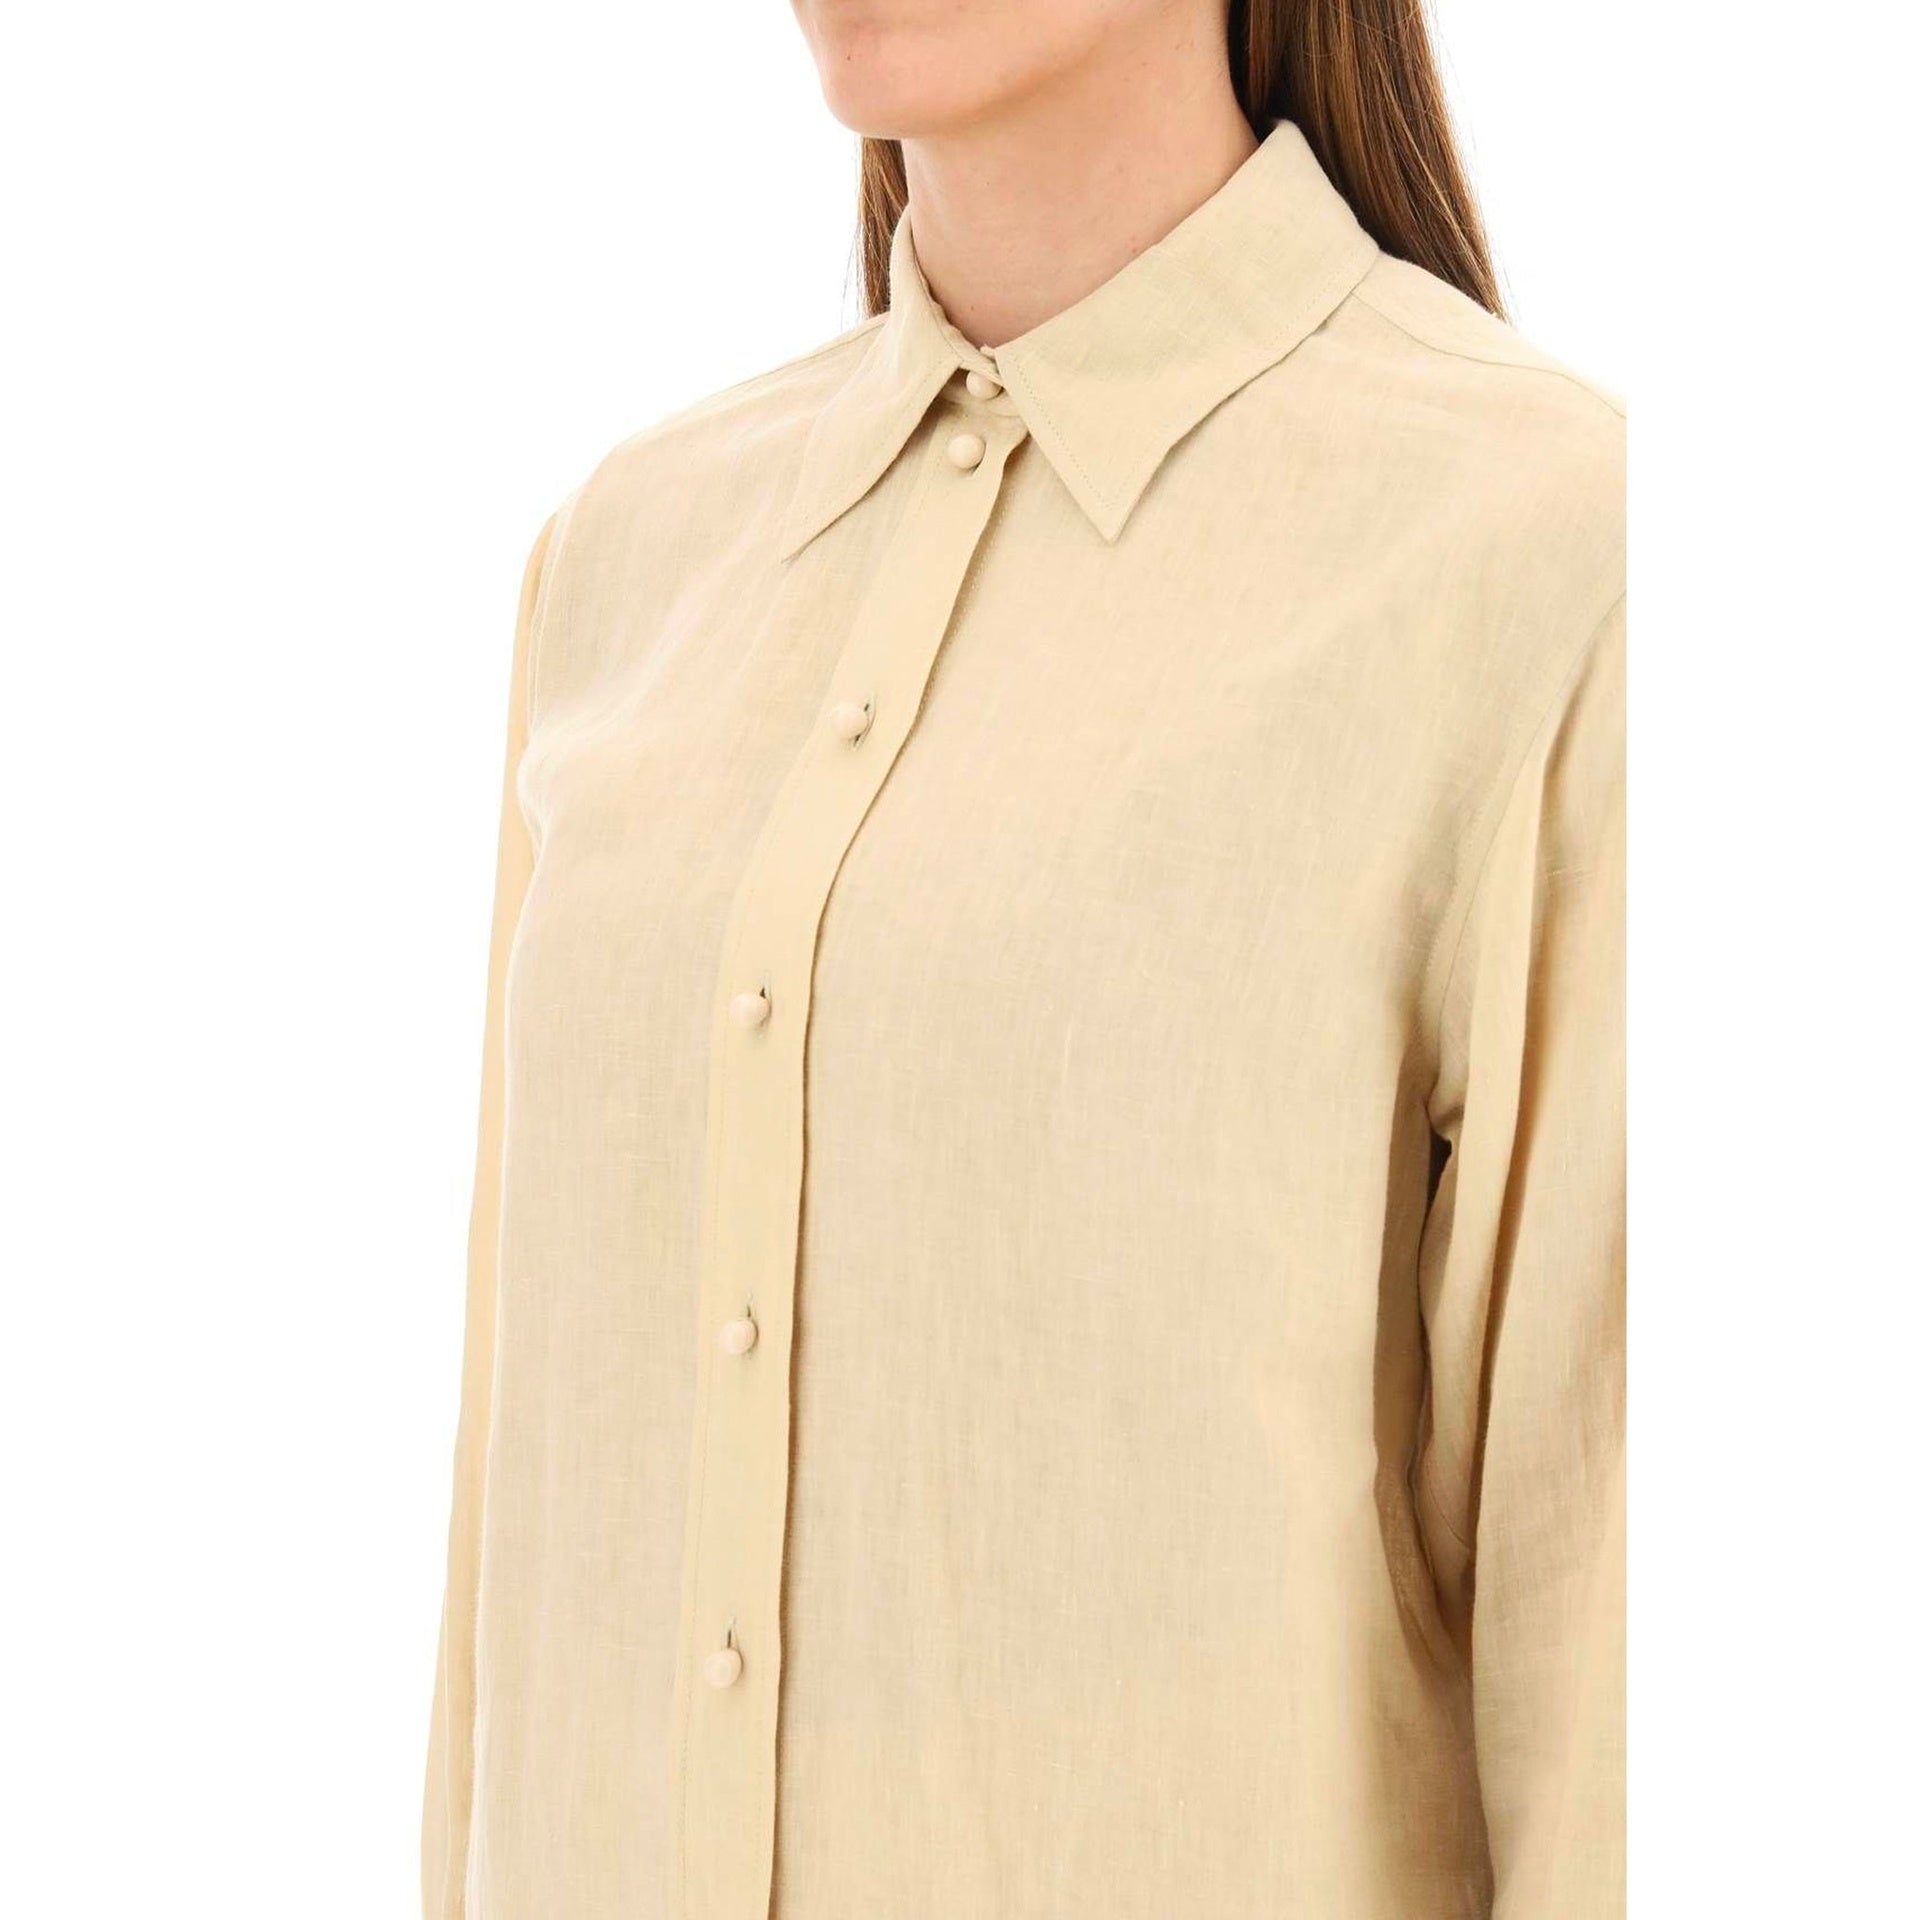 CHLOE-OUTLET-SALE-Chloe-Linen-Shirt-Shirts-BROWN-42-ARCHIVE-COLLECTION-4.jpg